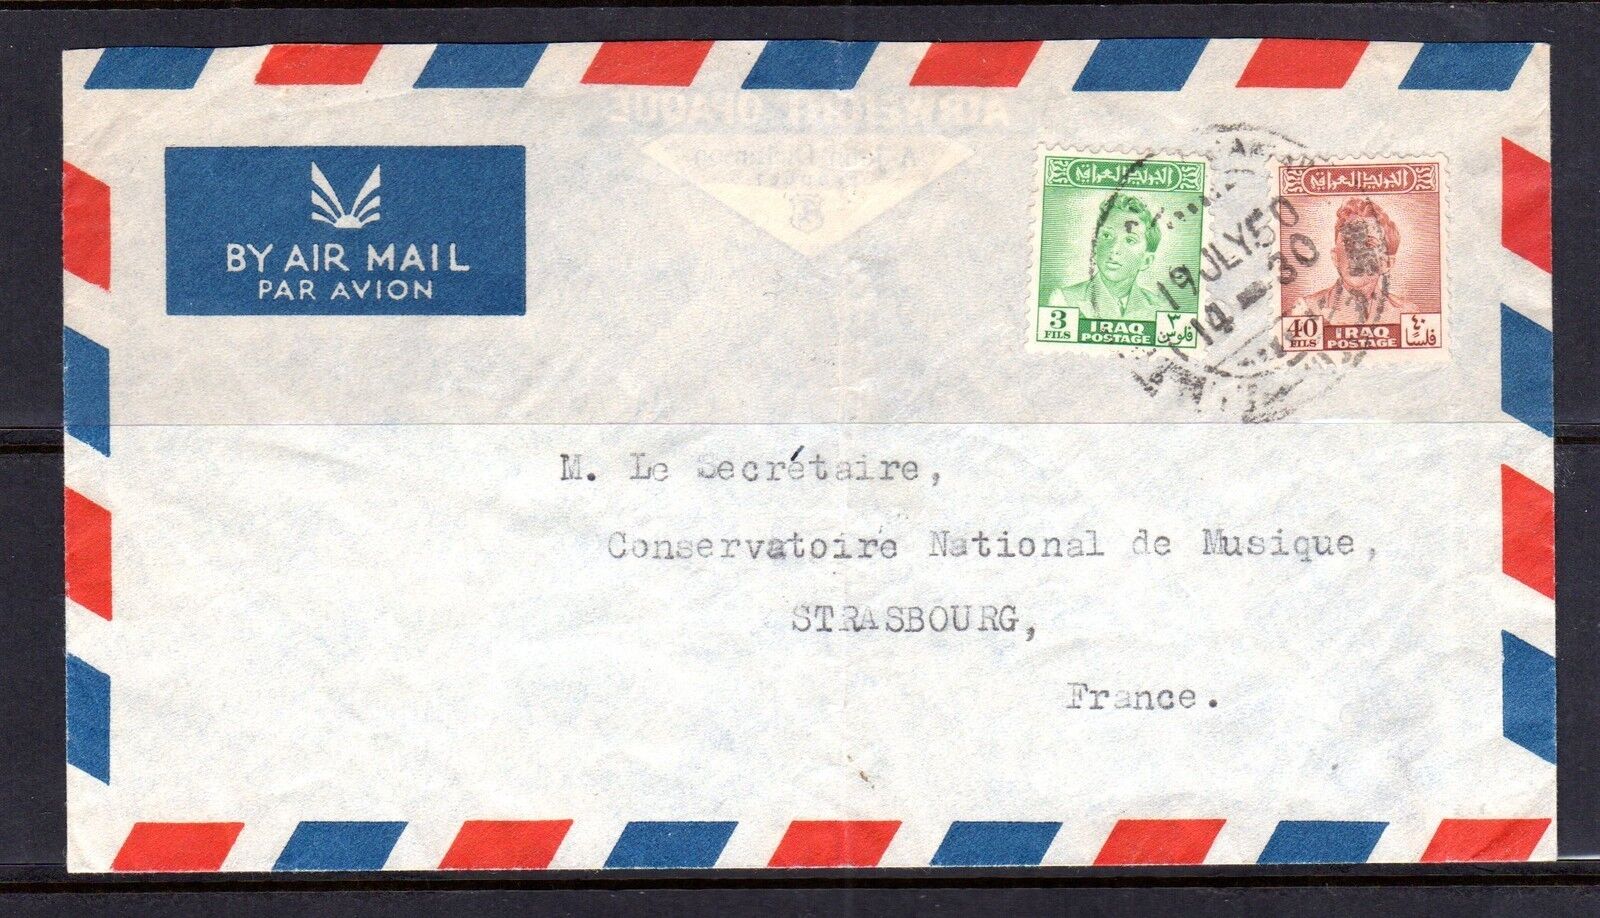 IRAQ Max 53% OFF 1950 PALESTINE AIR STAMP OFFicial mail order TIED MAIL BAGHDAD COVER ON TO